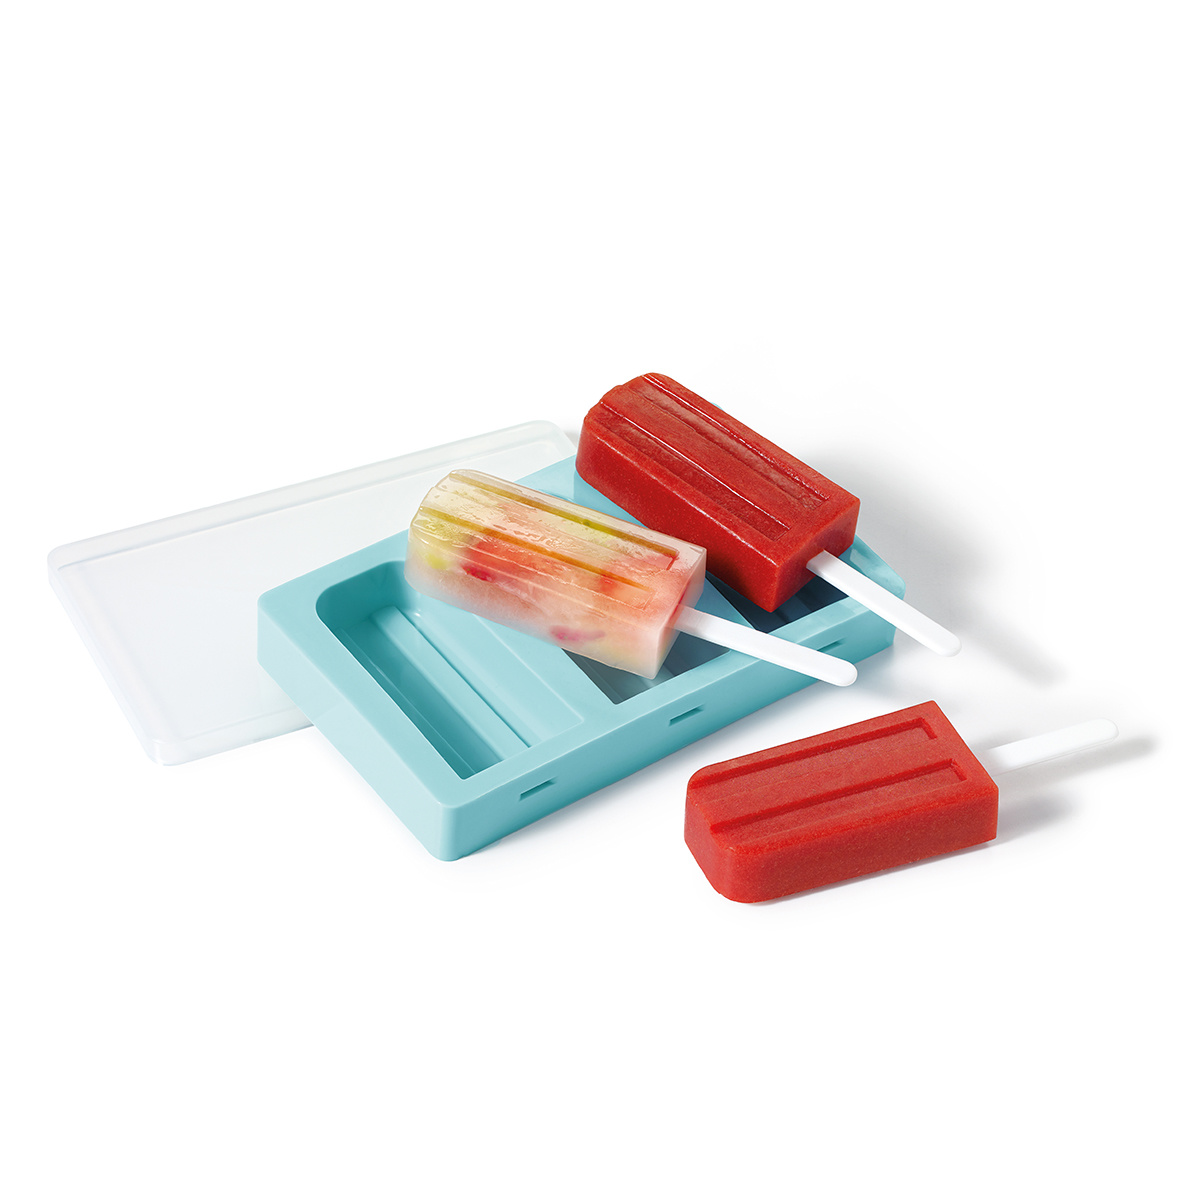 RICARDO Silicone Ice Pop Mould, Classic Shapes